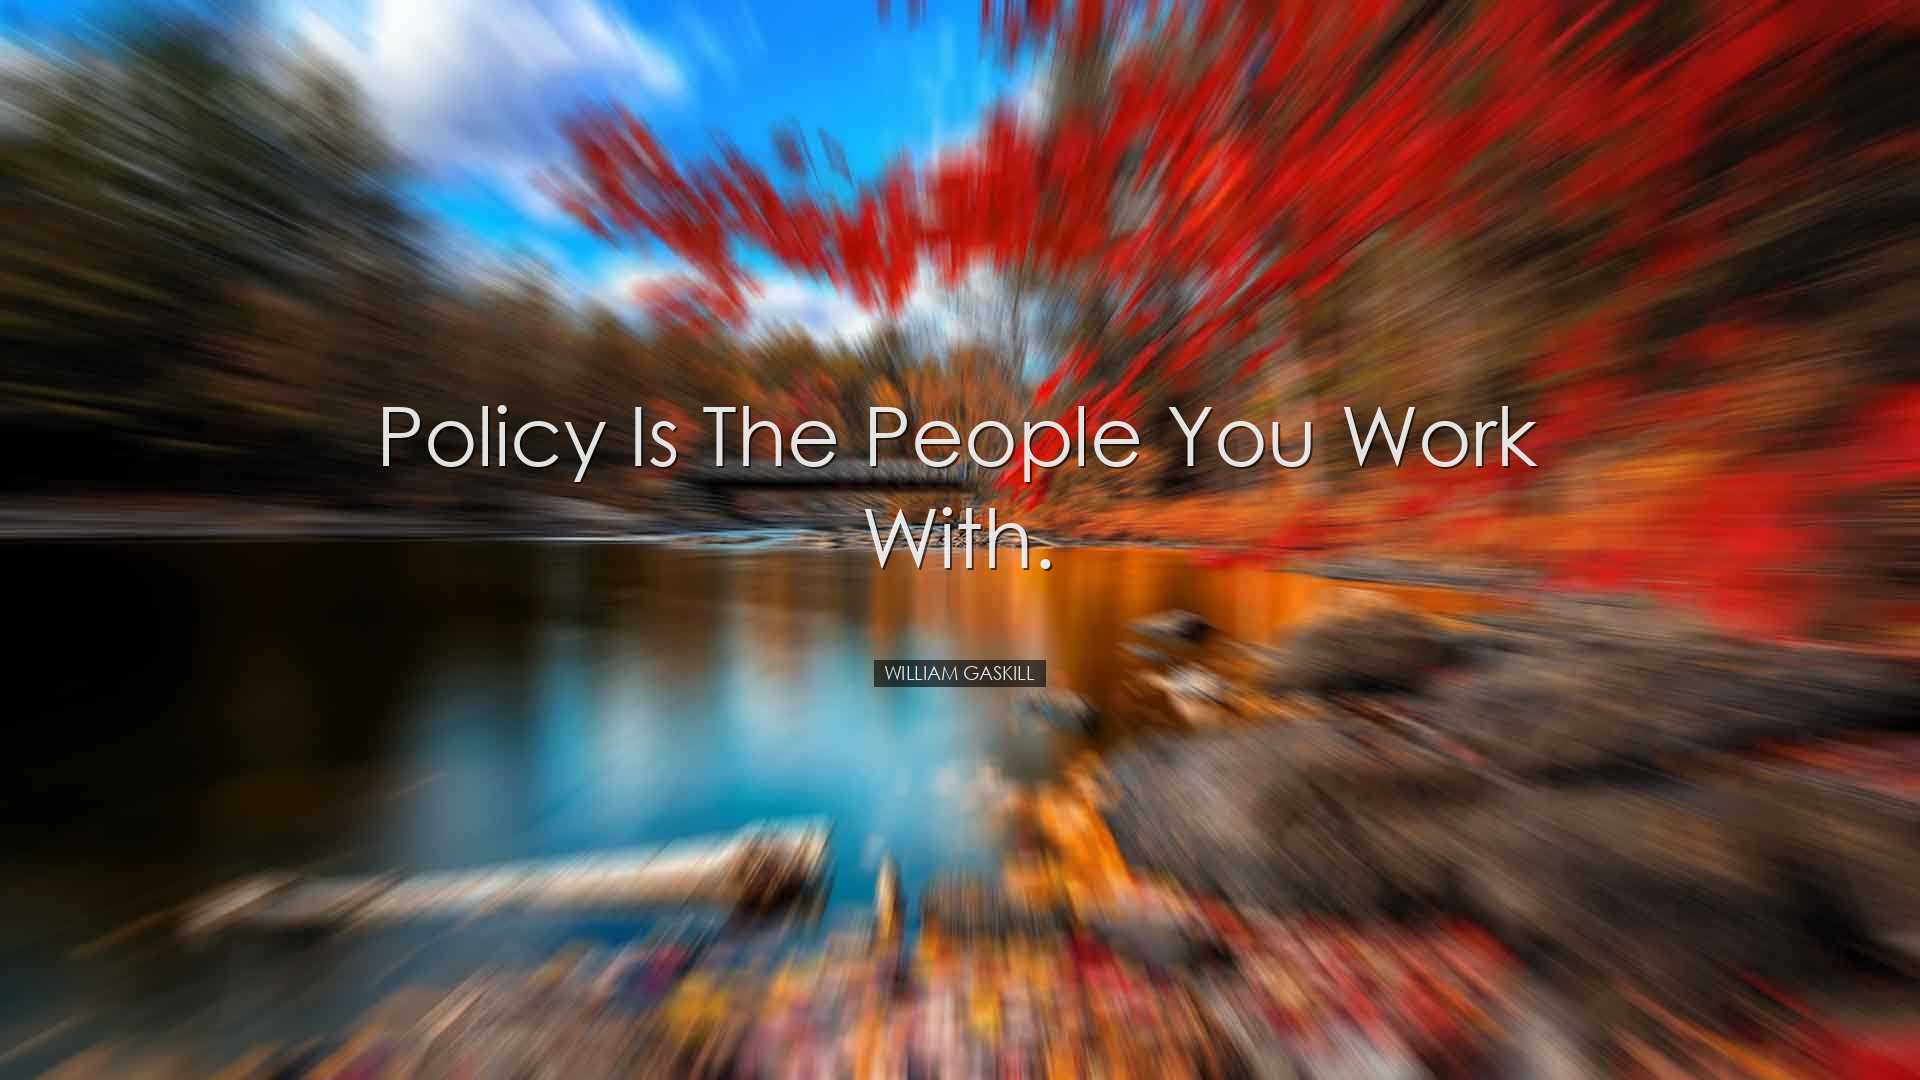 Policy is the people you work with. - William Gaskill